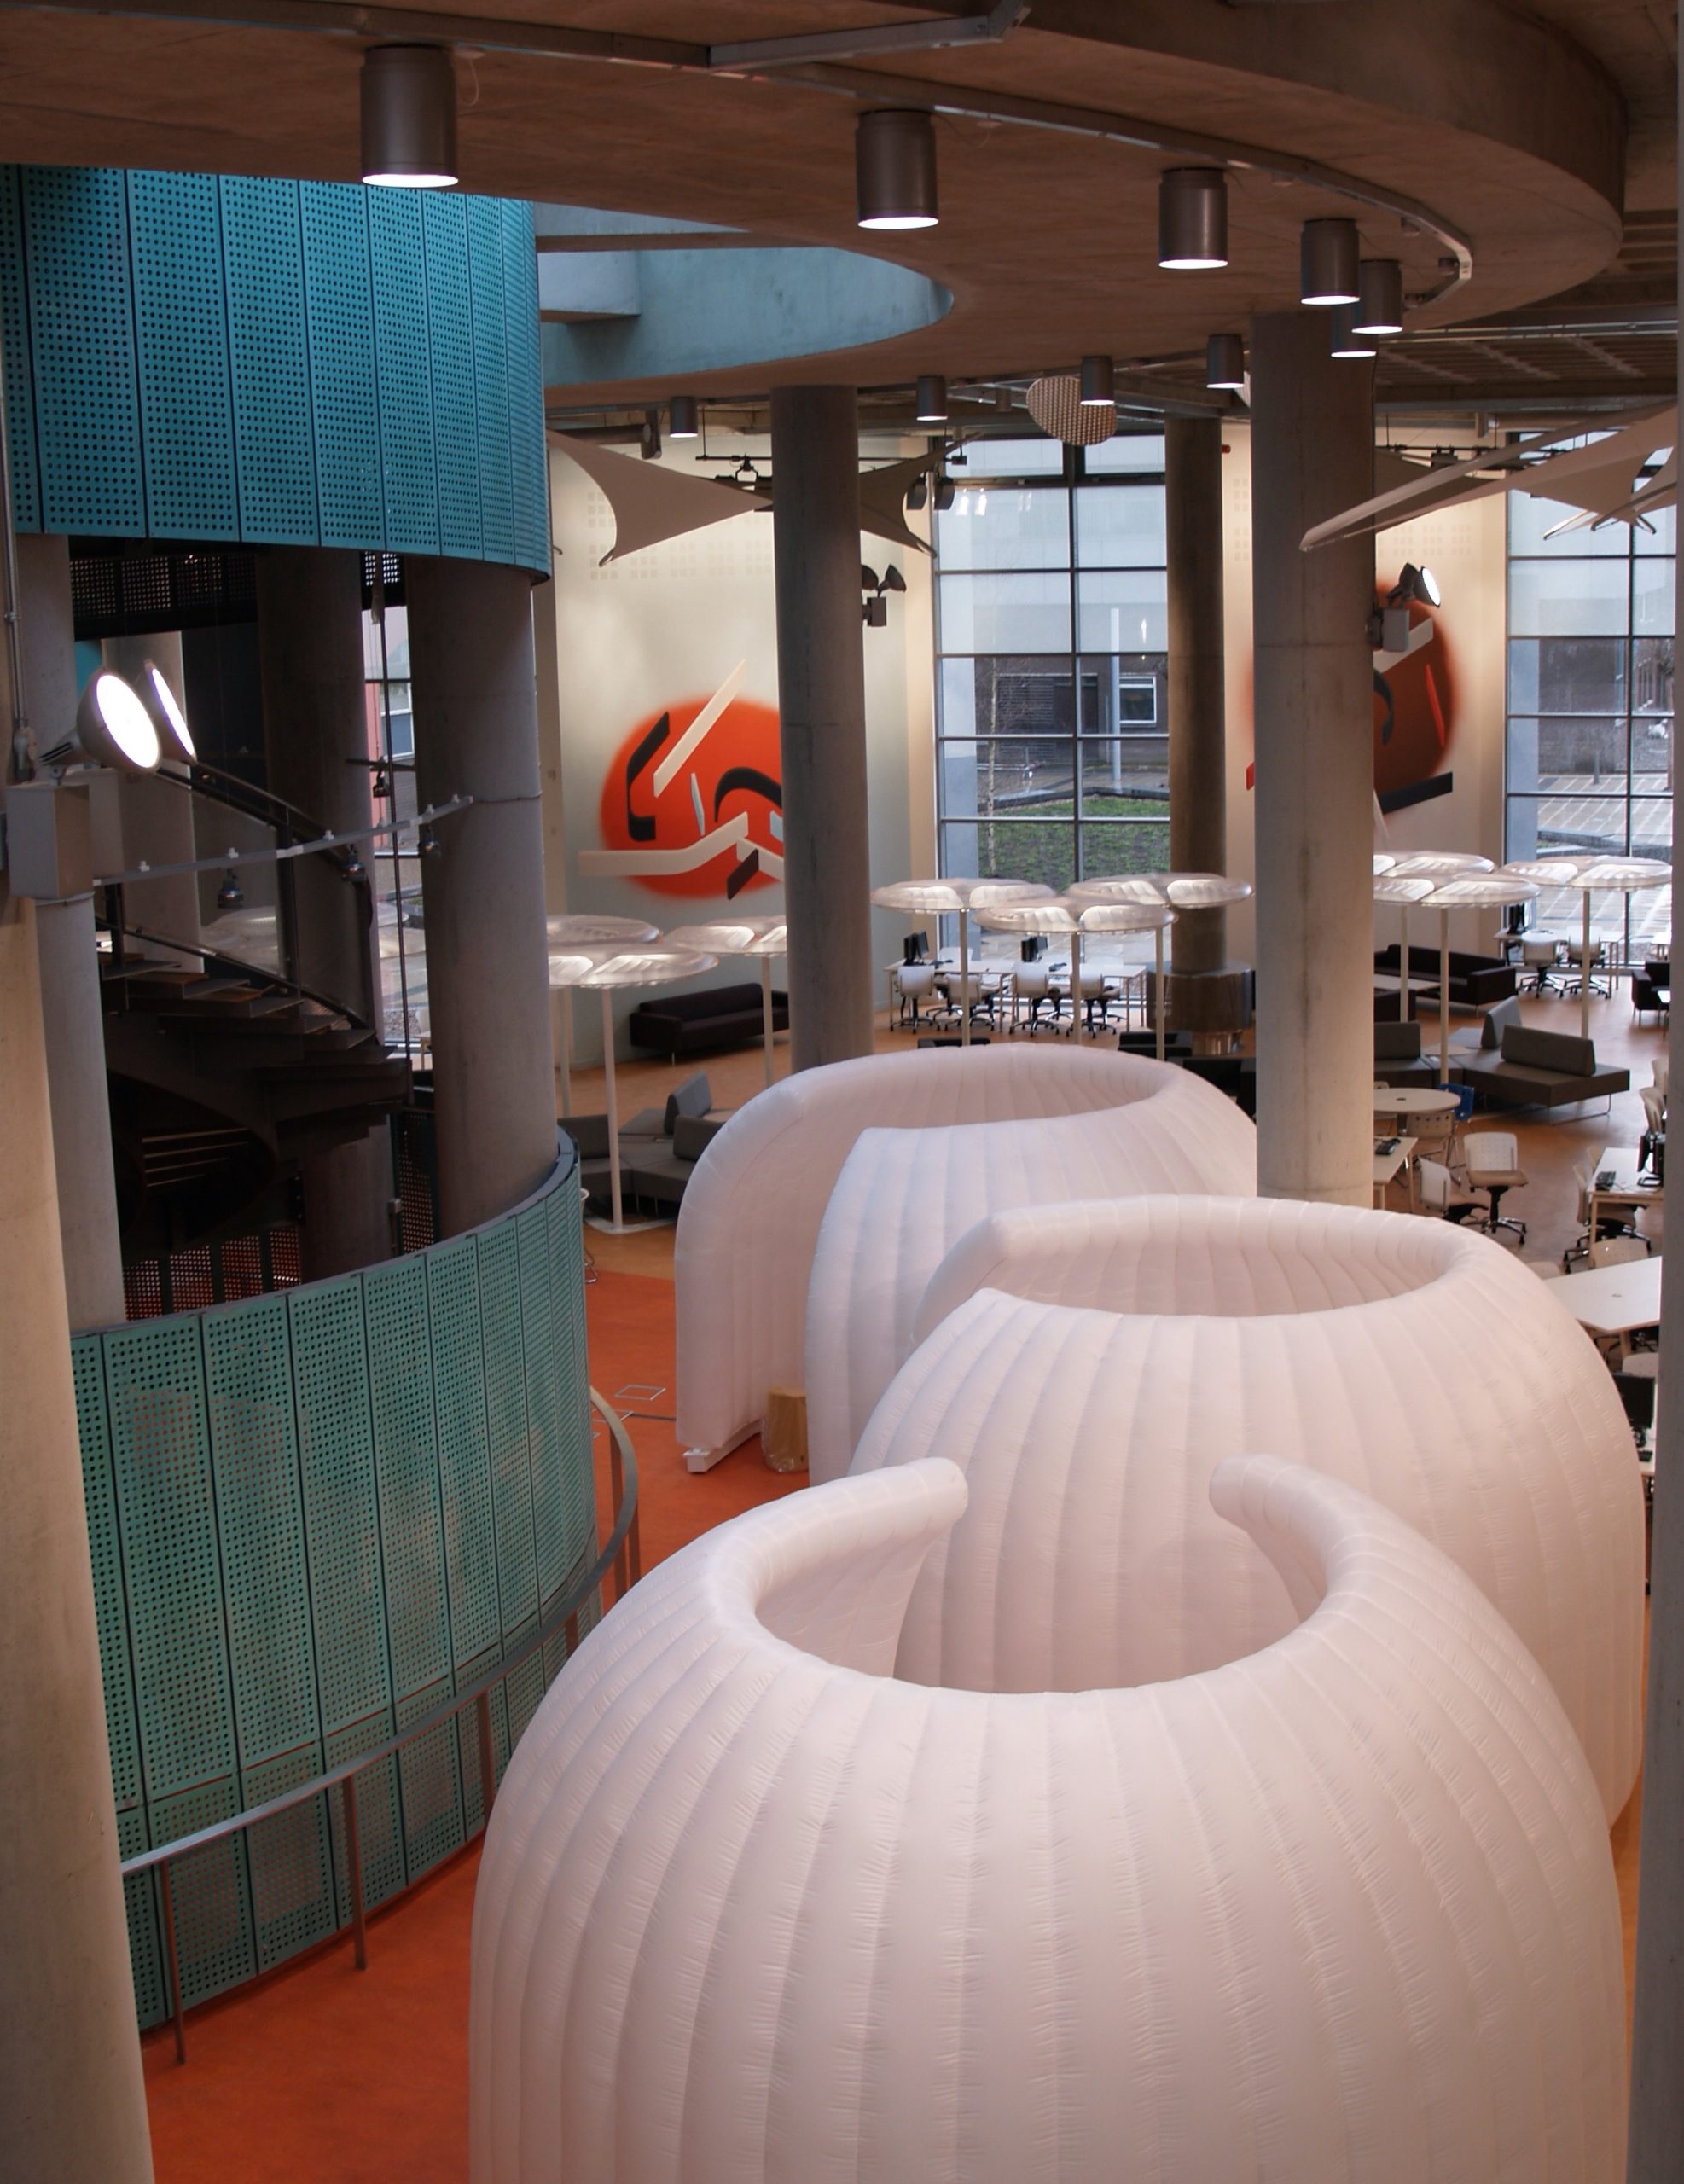 View of services mall in the Saltire Centre showing the inflatable igloos used to provide 'semi-private' study space